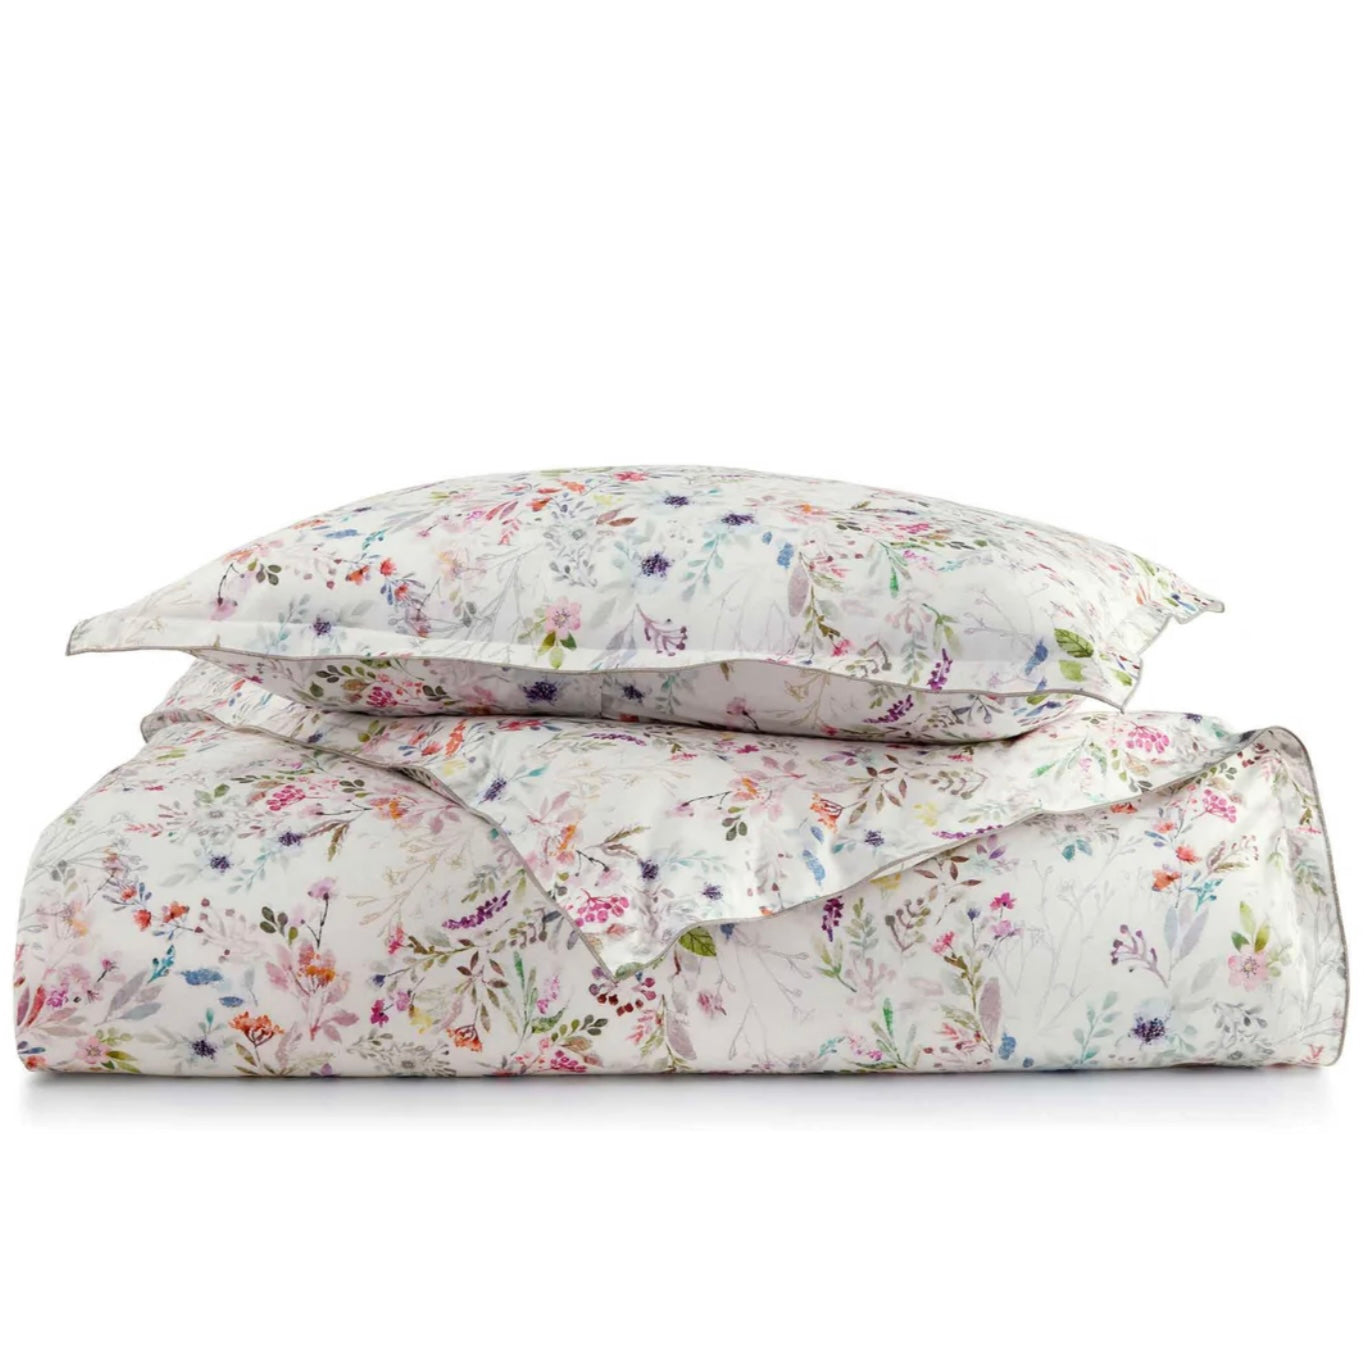 Chloe Floral Percale Duvet Cover by Peacock Alley